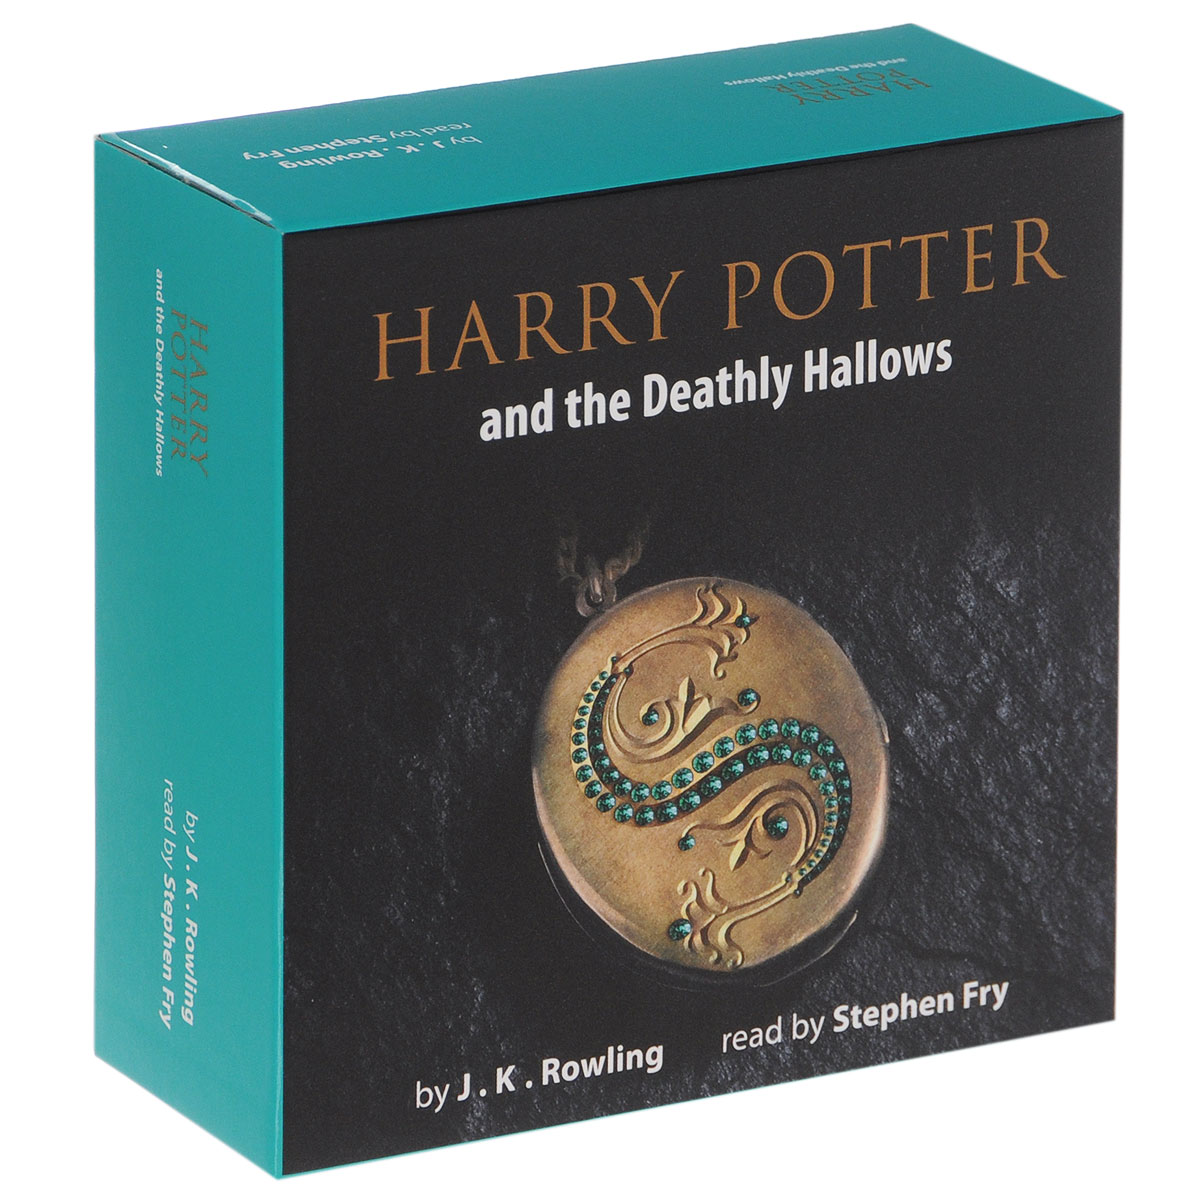 harry potter and the deathly hallows audiobook length